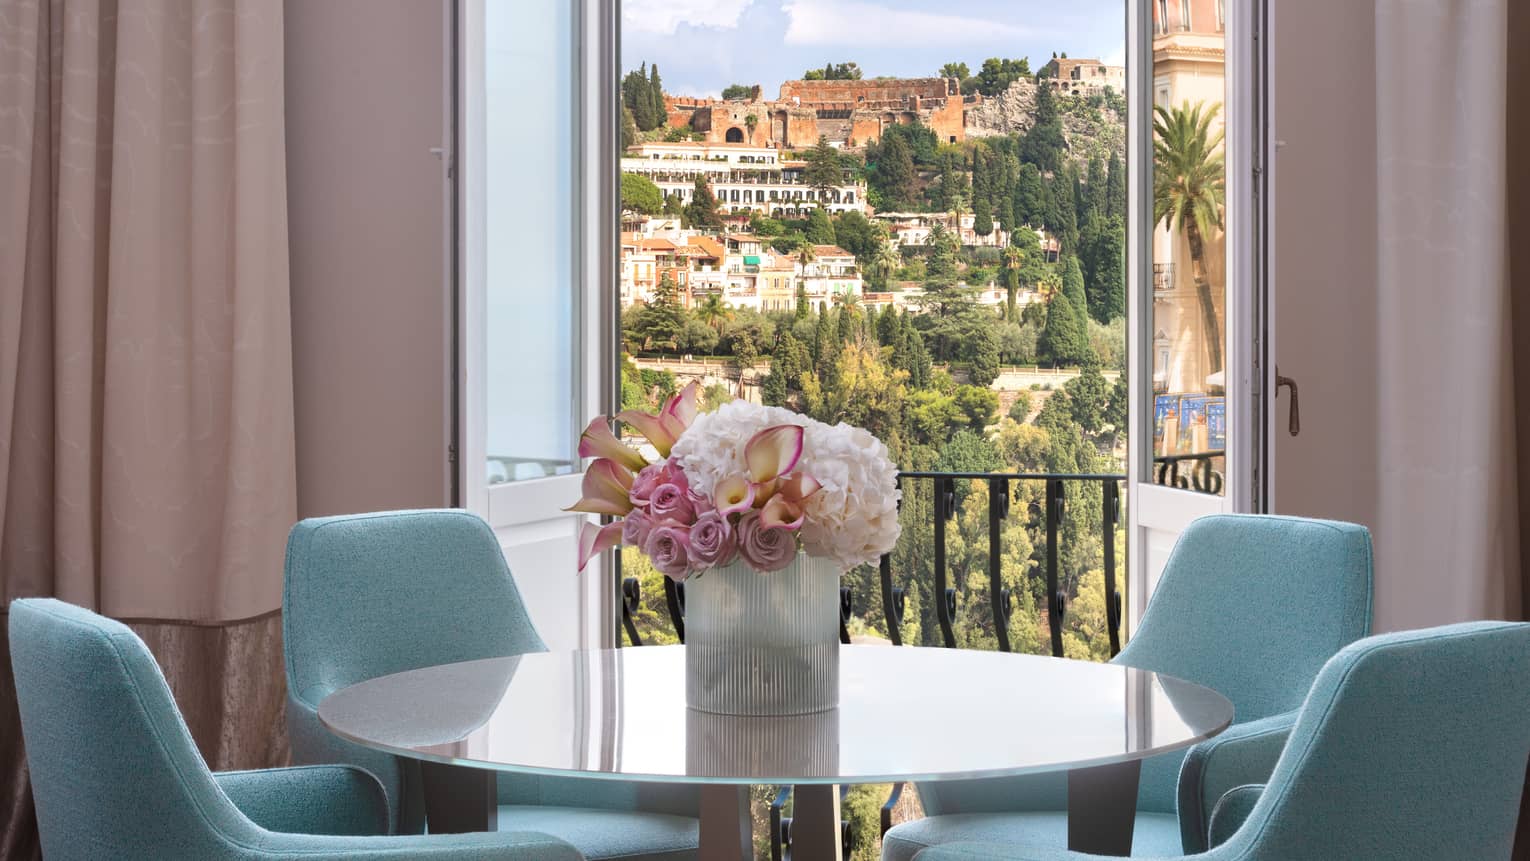 Round dining table, pink flowers, four turquoise chairs, doors opening to balcony